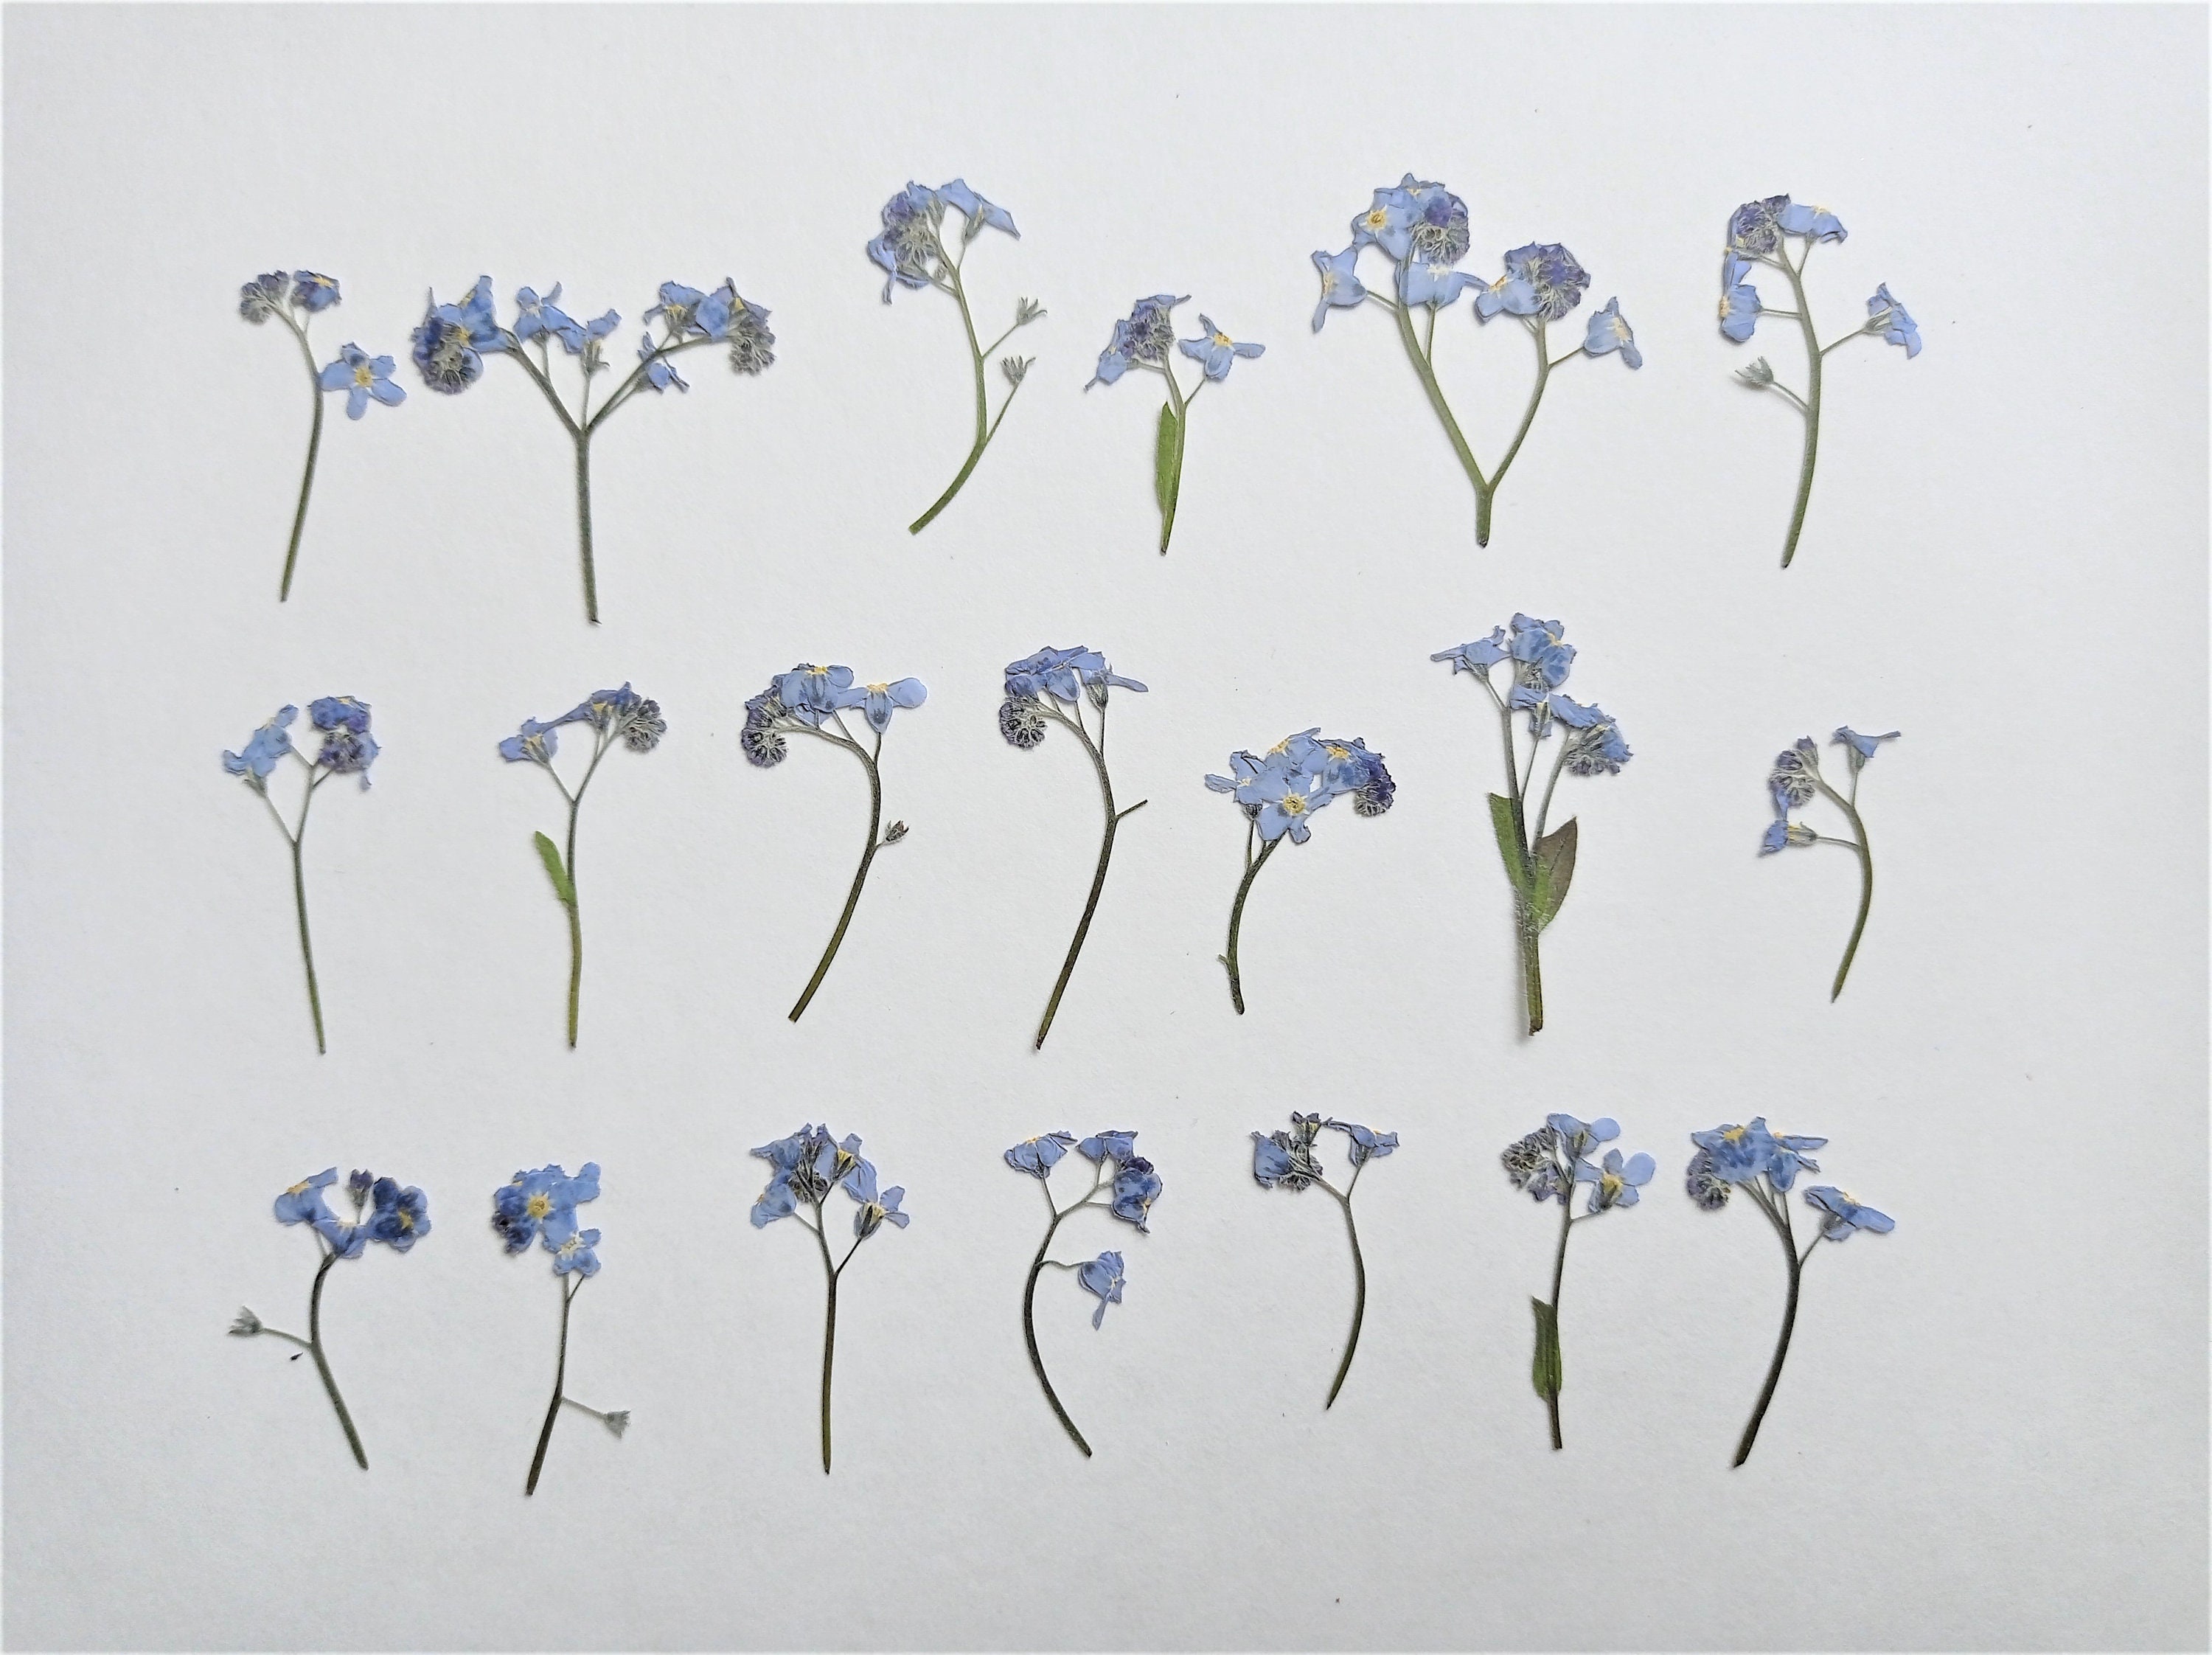 Dried Pressed Flowers, Astrantia 15 Pcs for Crafts, Dried Flower Art,  Wedding Flower, Card Making, Tiny Dried Flowers for Resin 